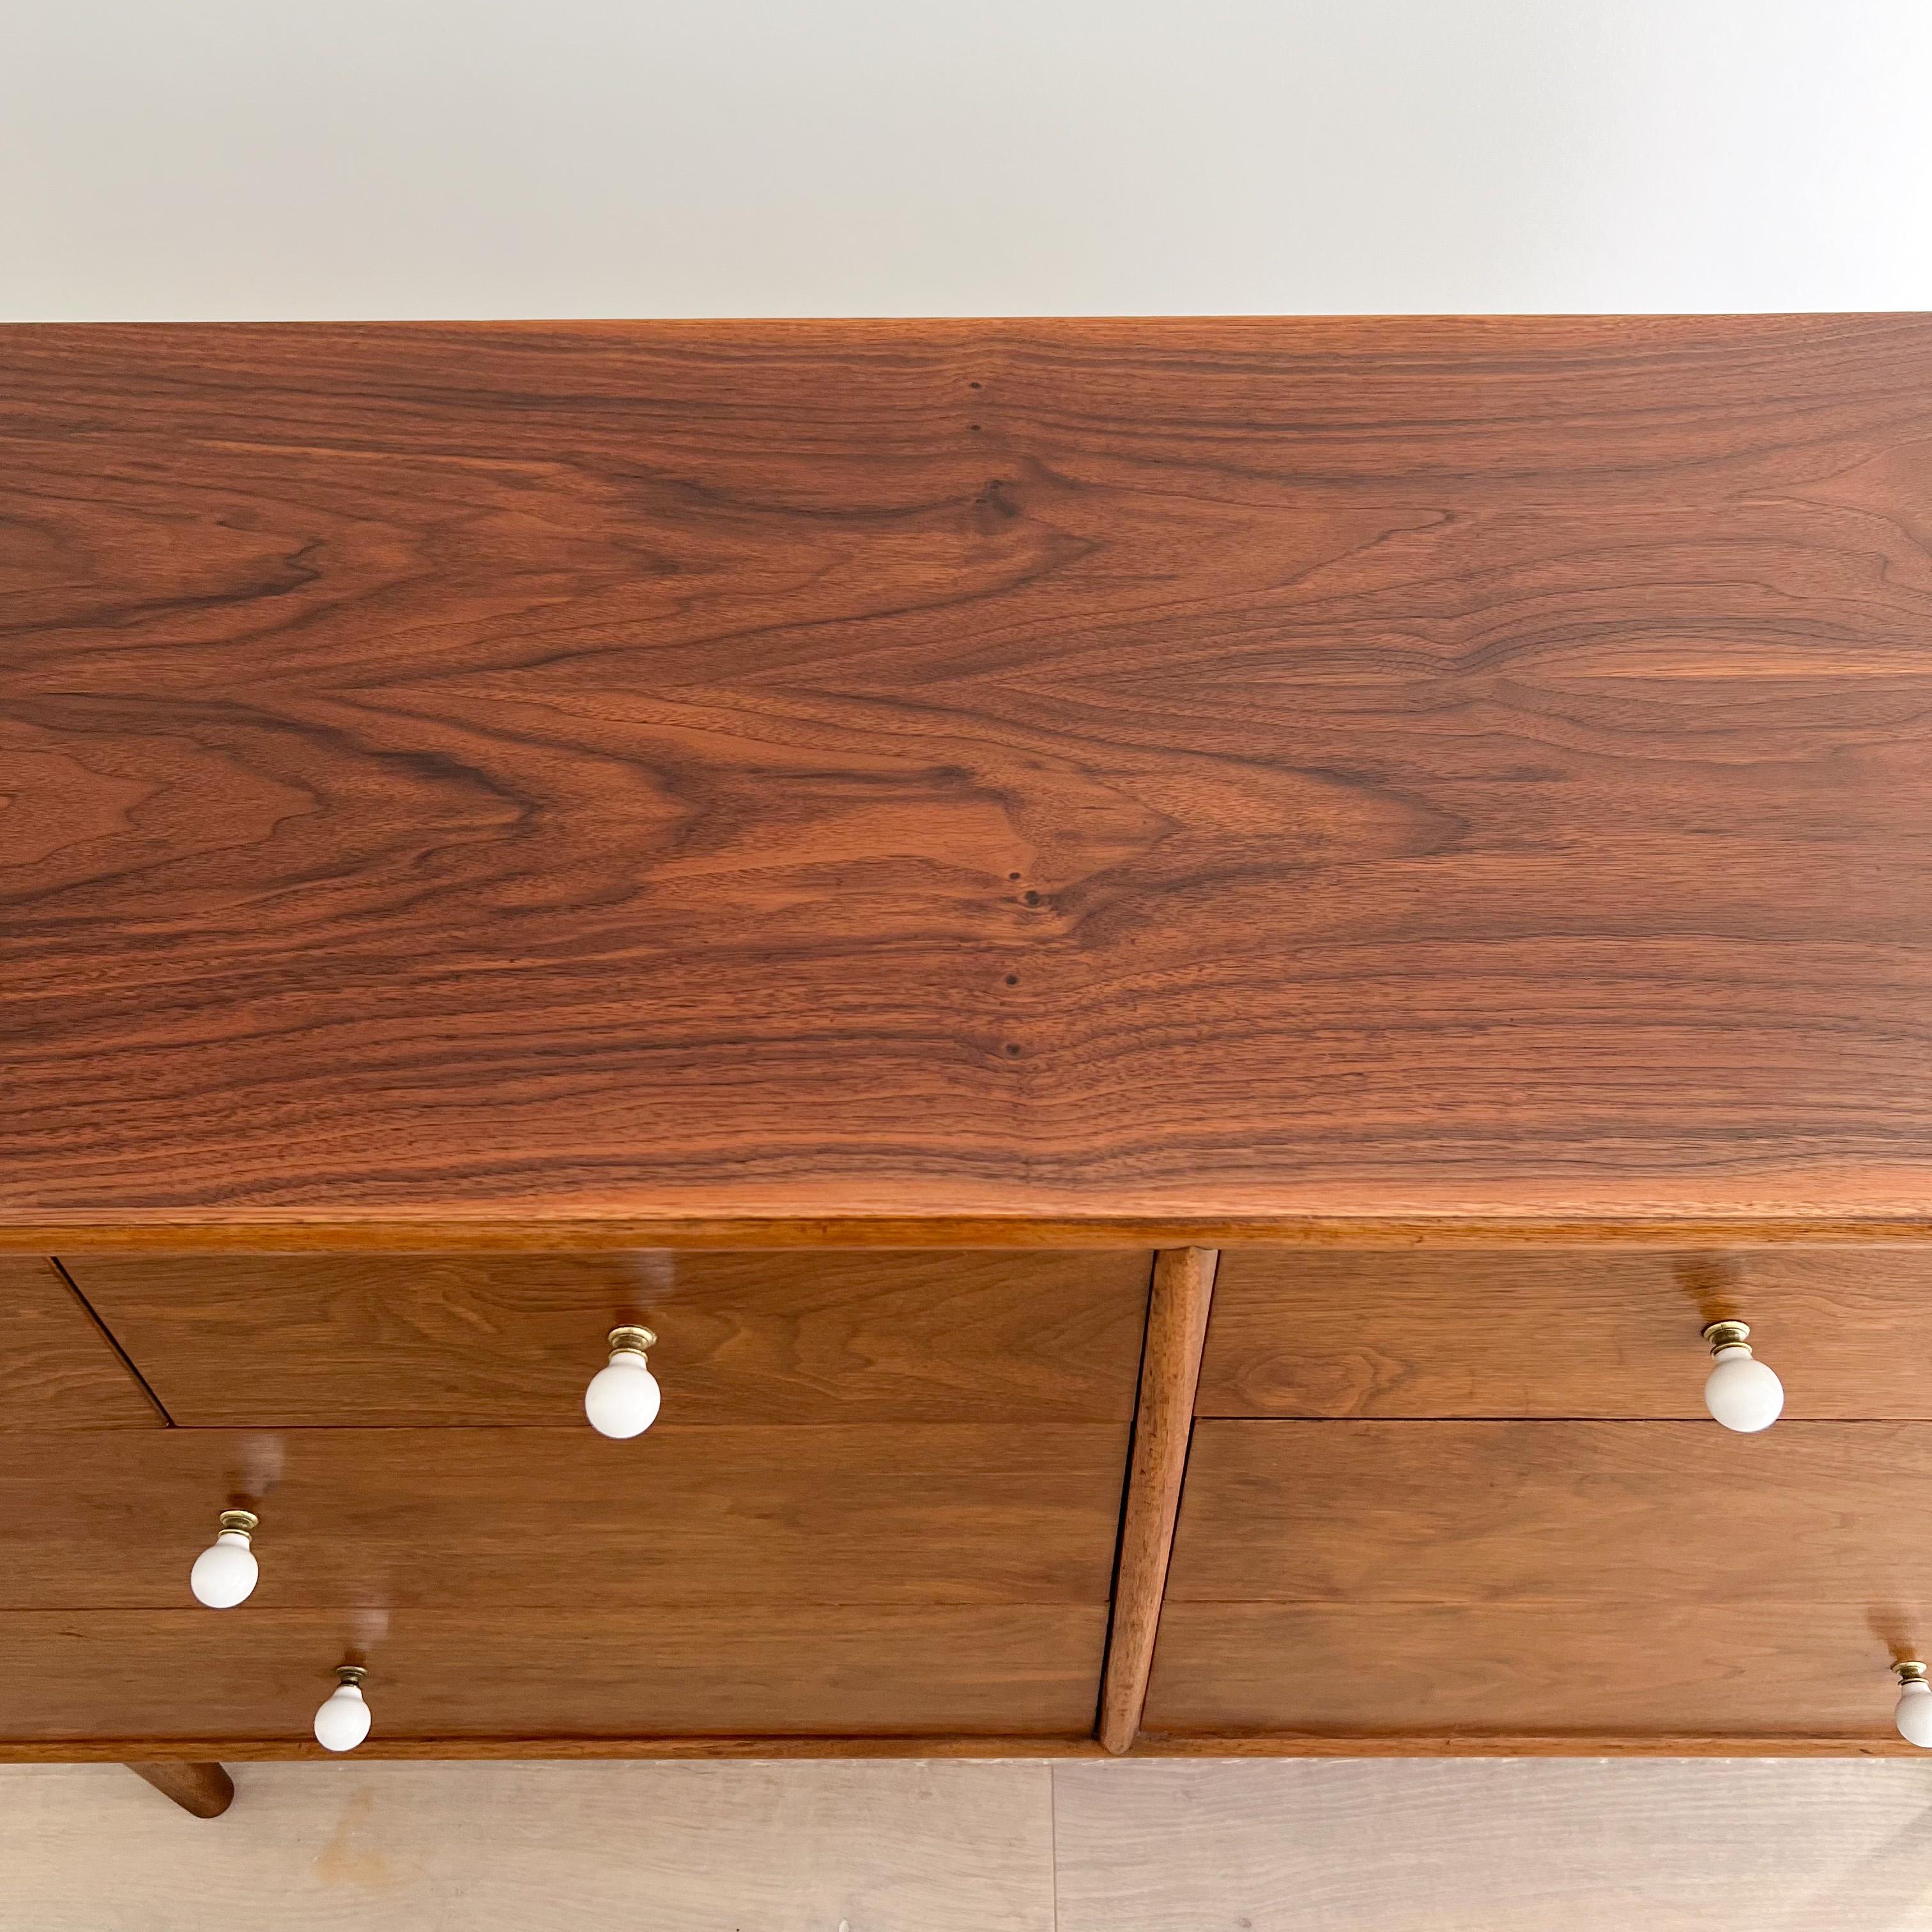 Mid Century Drexel declaration low dresser by Kipp Stewart & Stewart McDougall. This piece features bookmatched black walnut grains and includes their signature porcelain knobs. Includes plenty of storage with eight dovetailed drawers.